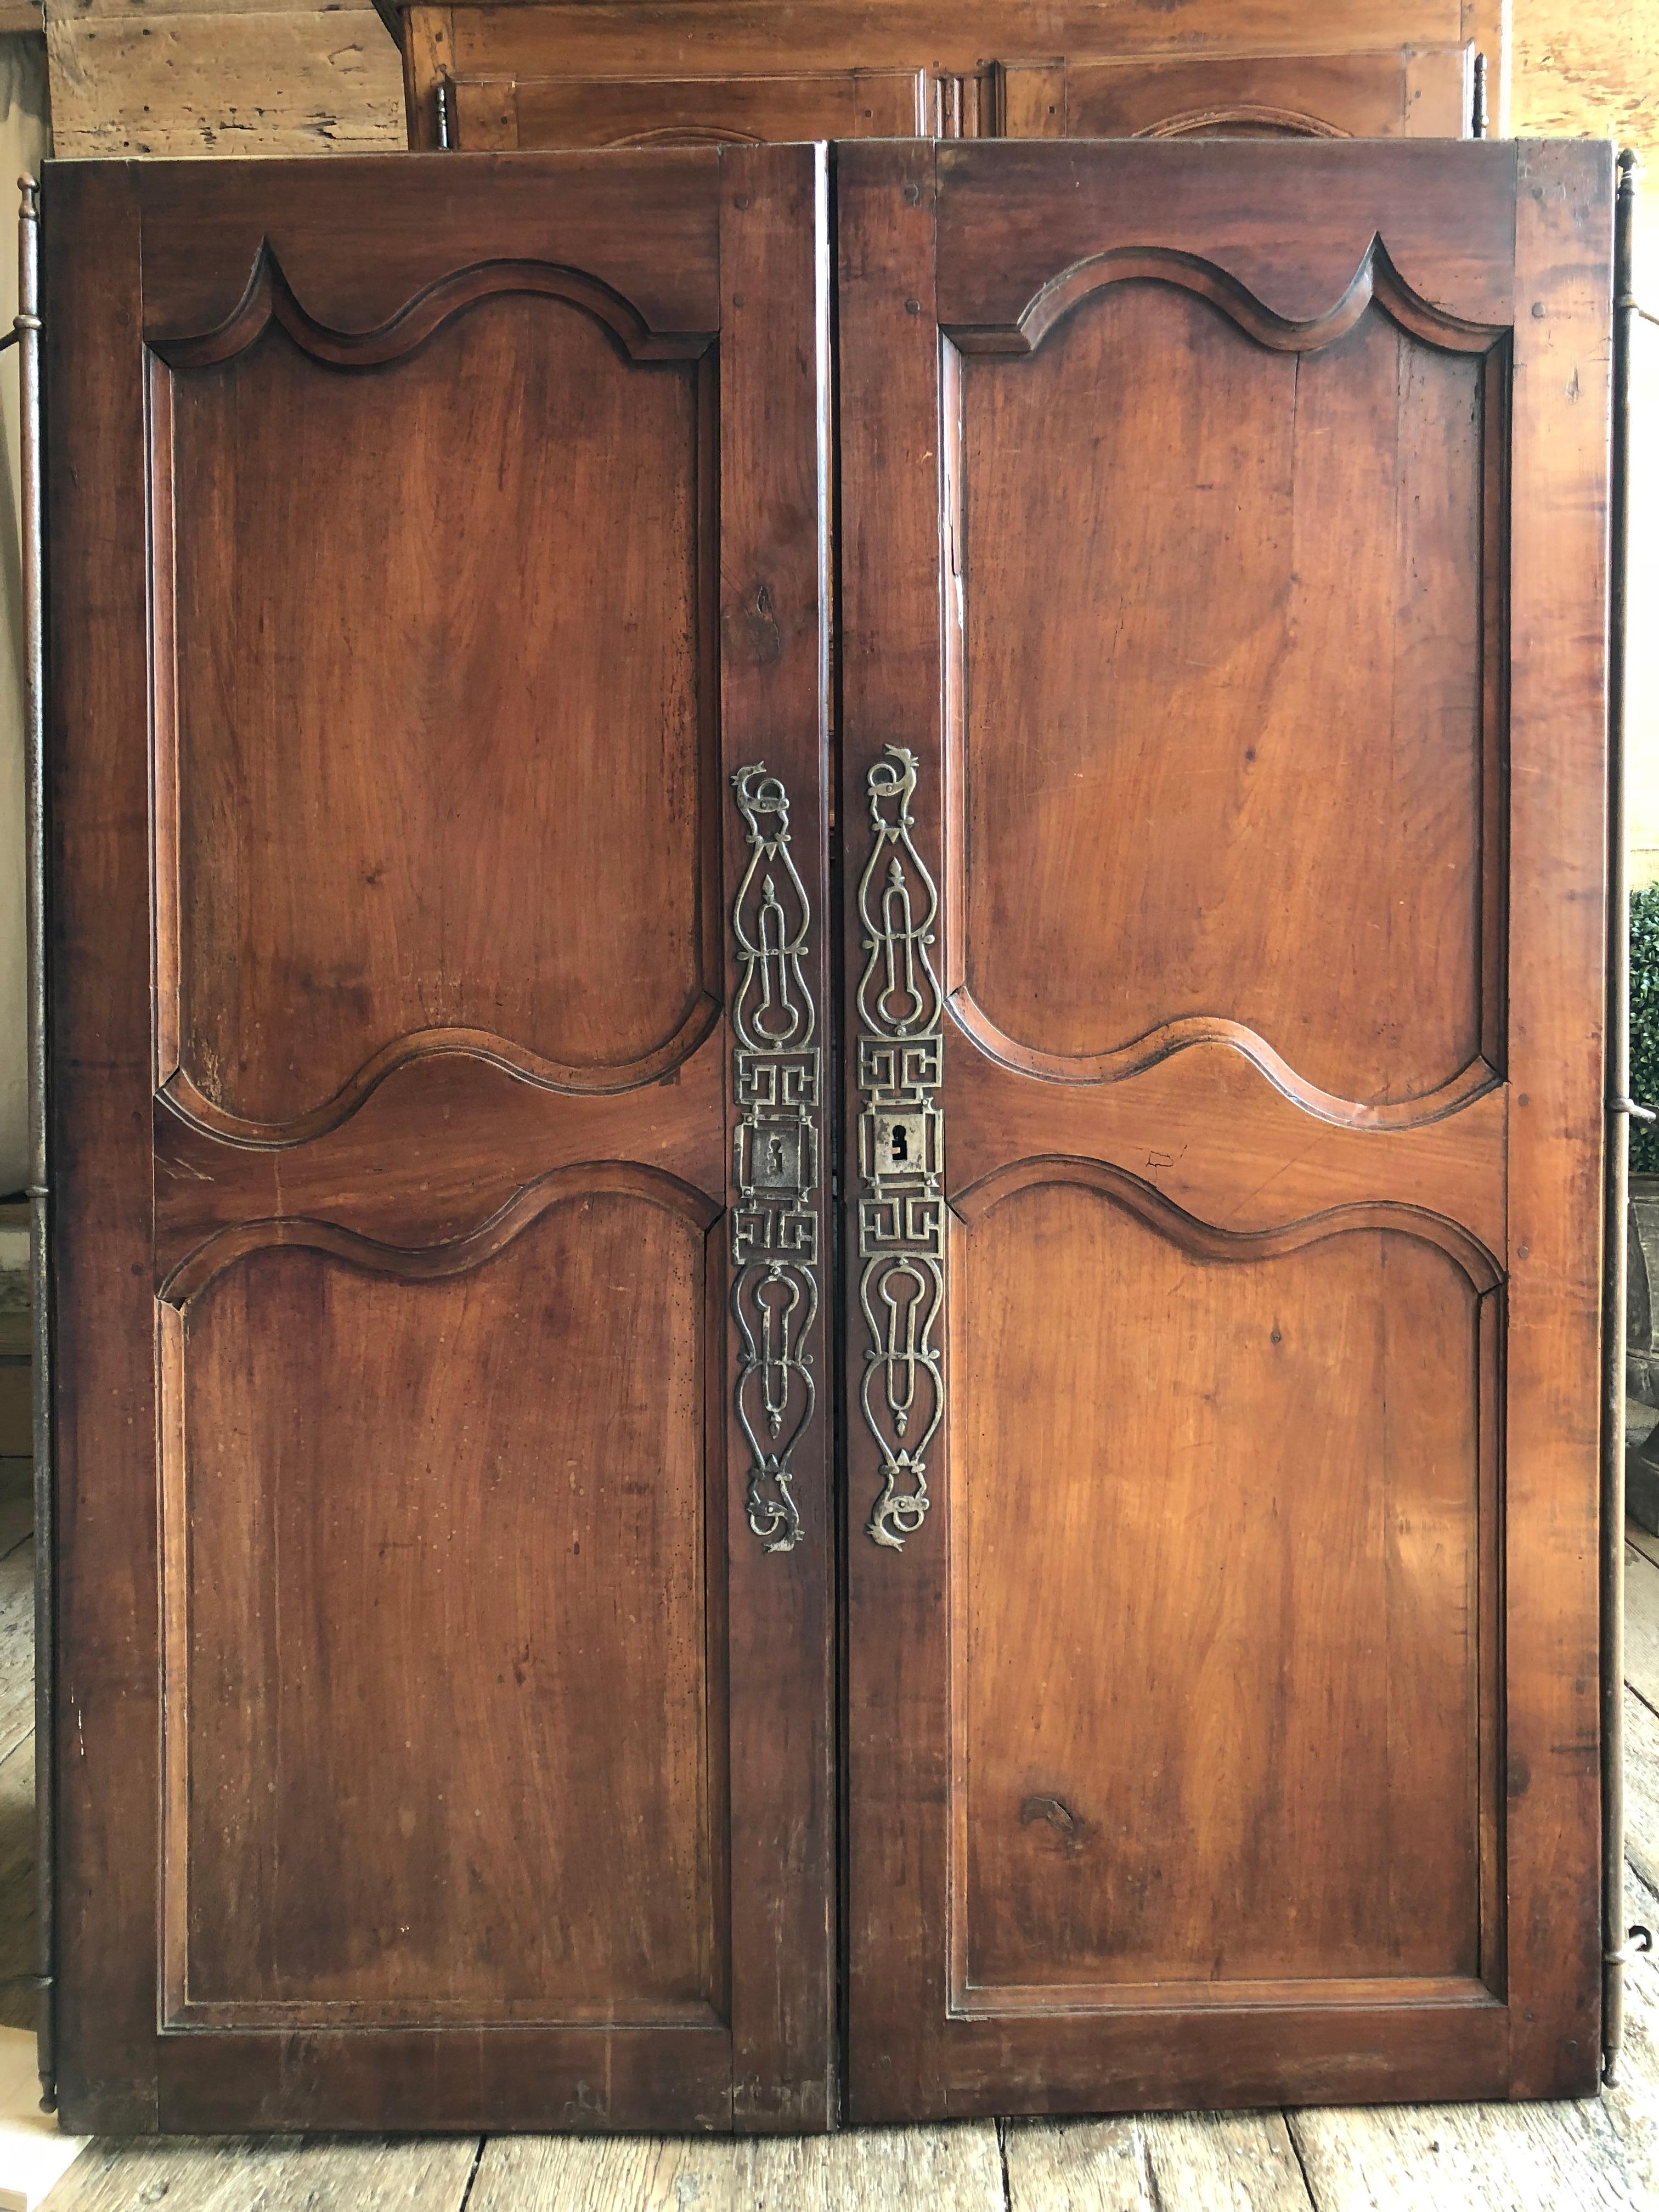 A pair of French Louis XV armoire doors, circa 1760, in cherry, with original steel hardware, nicely paneled and with original lock. Great for adding interest to built-in closets or cabinets.